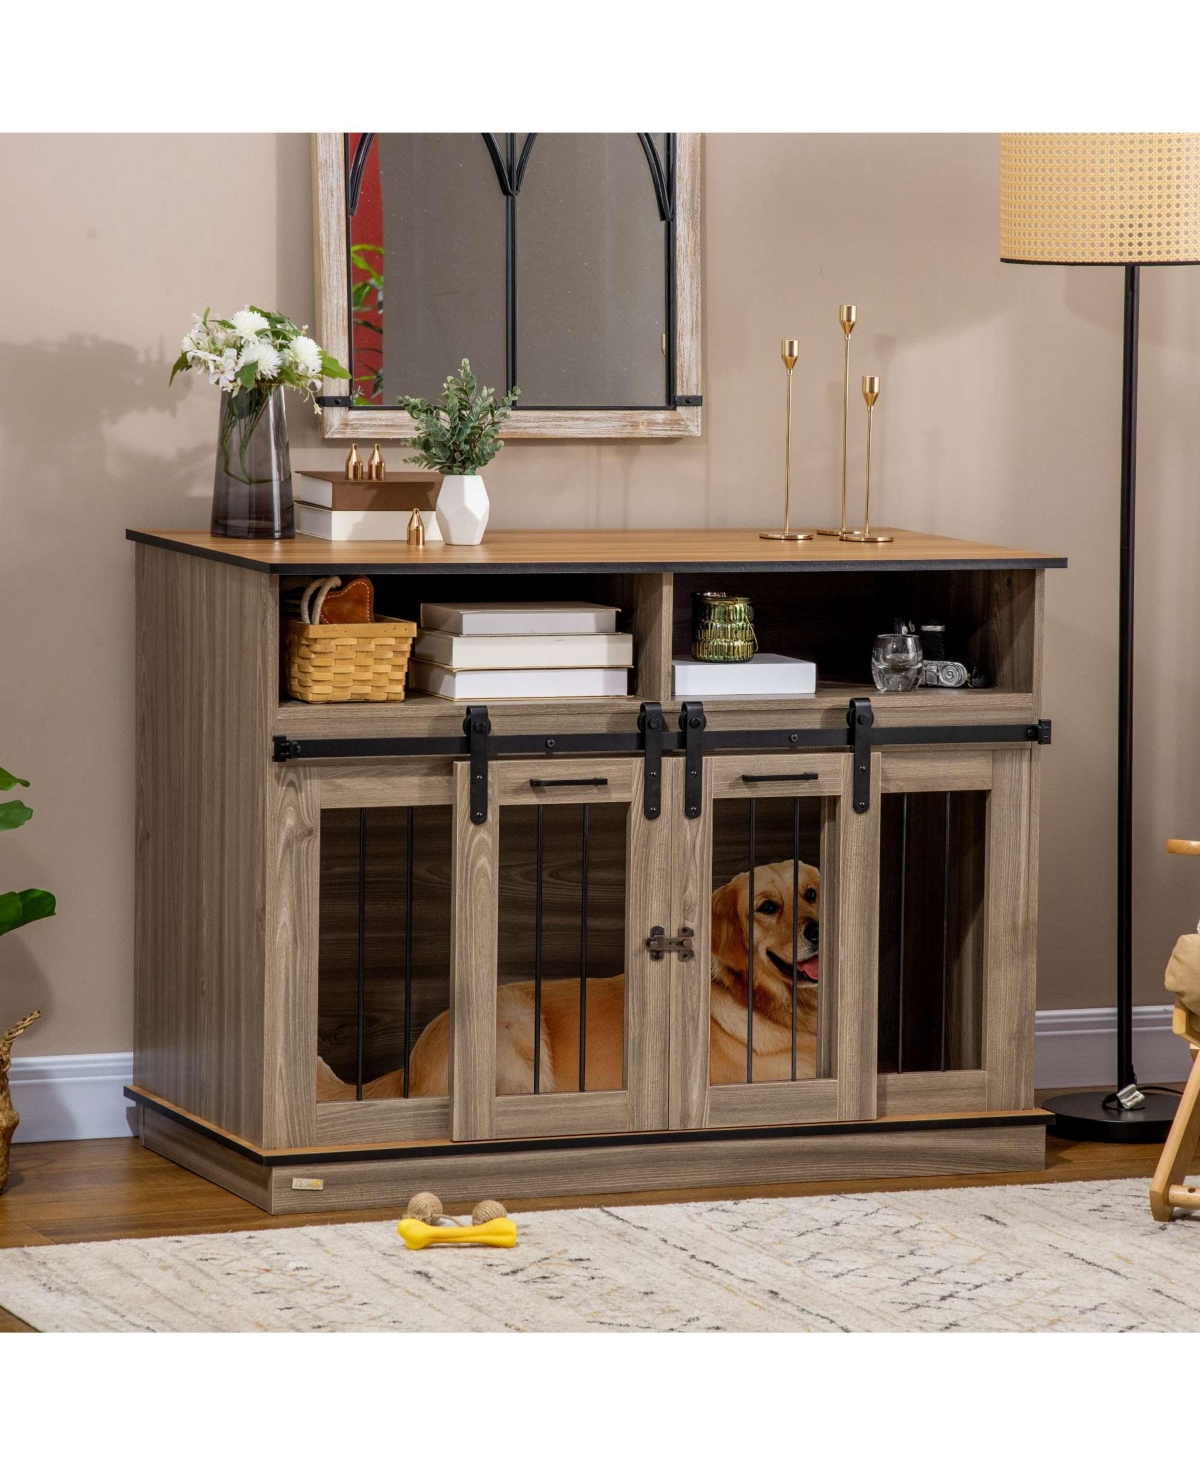 Size-Changing Dog Crate End Table with Removable Panel & Two Rooms, Large or Small Dog Cage with Shelves and Sliding Doors, Fancy Puppy Furnitu